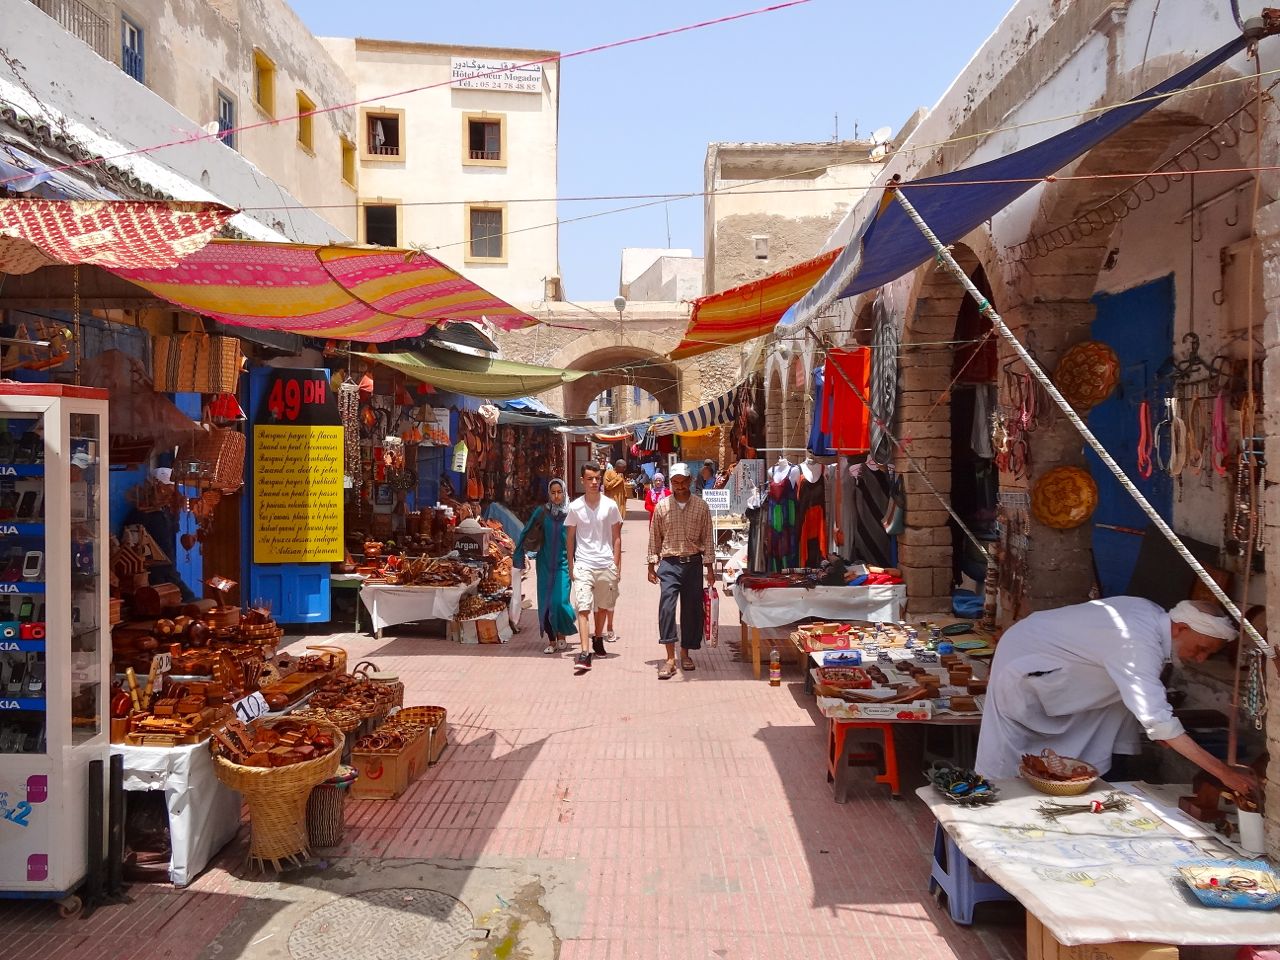 From Agadir to Essaouira: A Day Trip to Remember